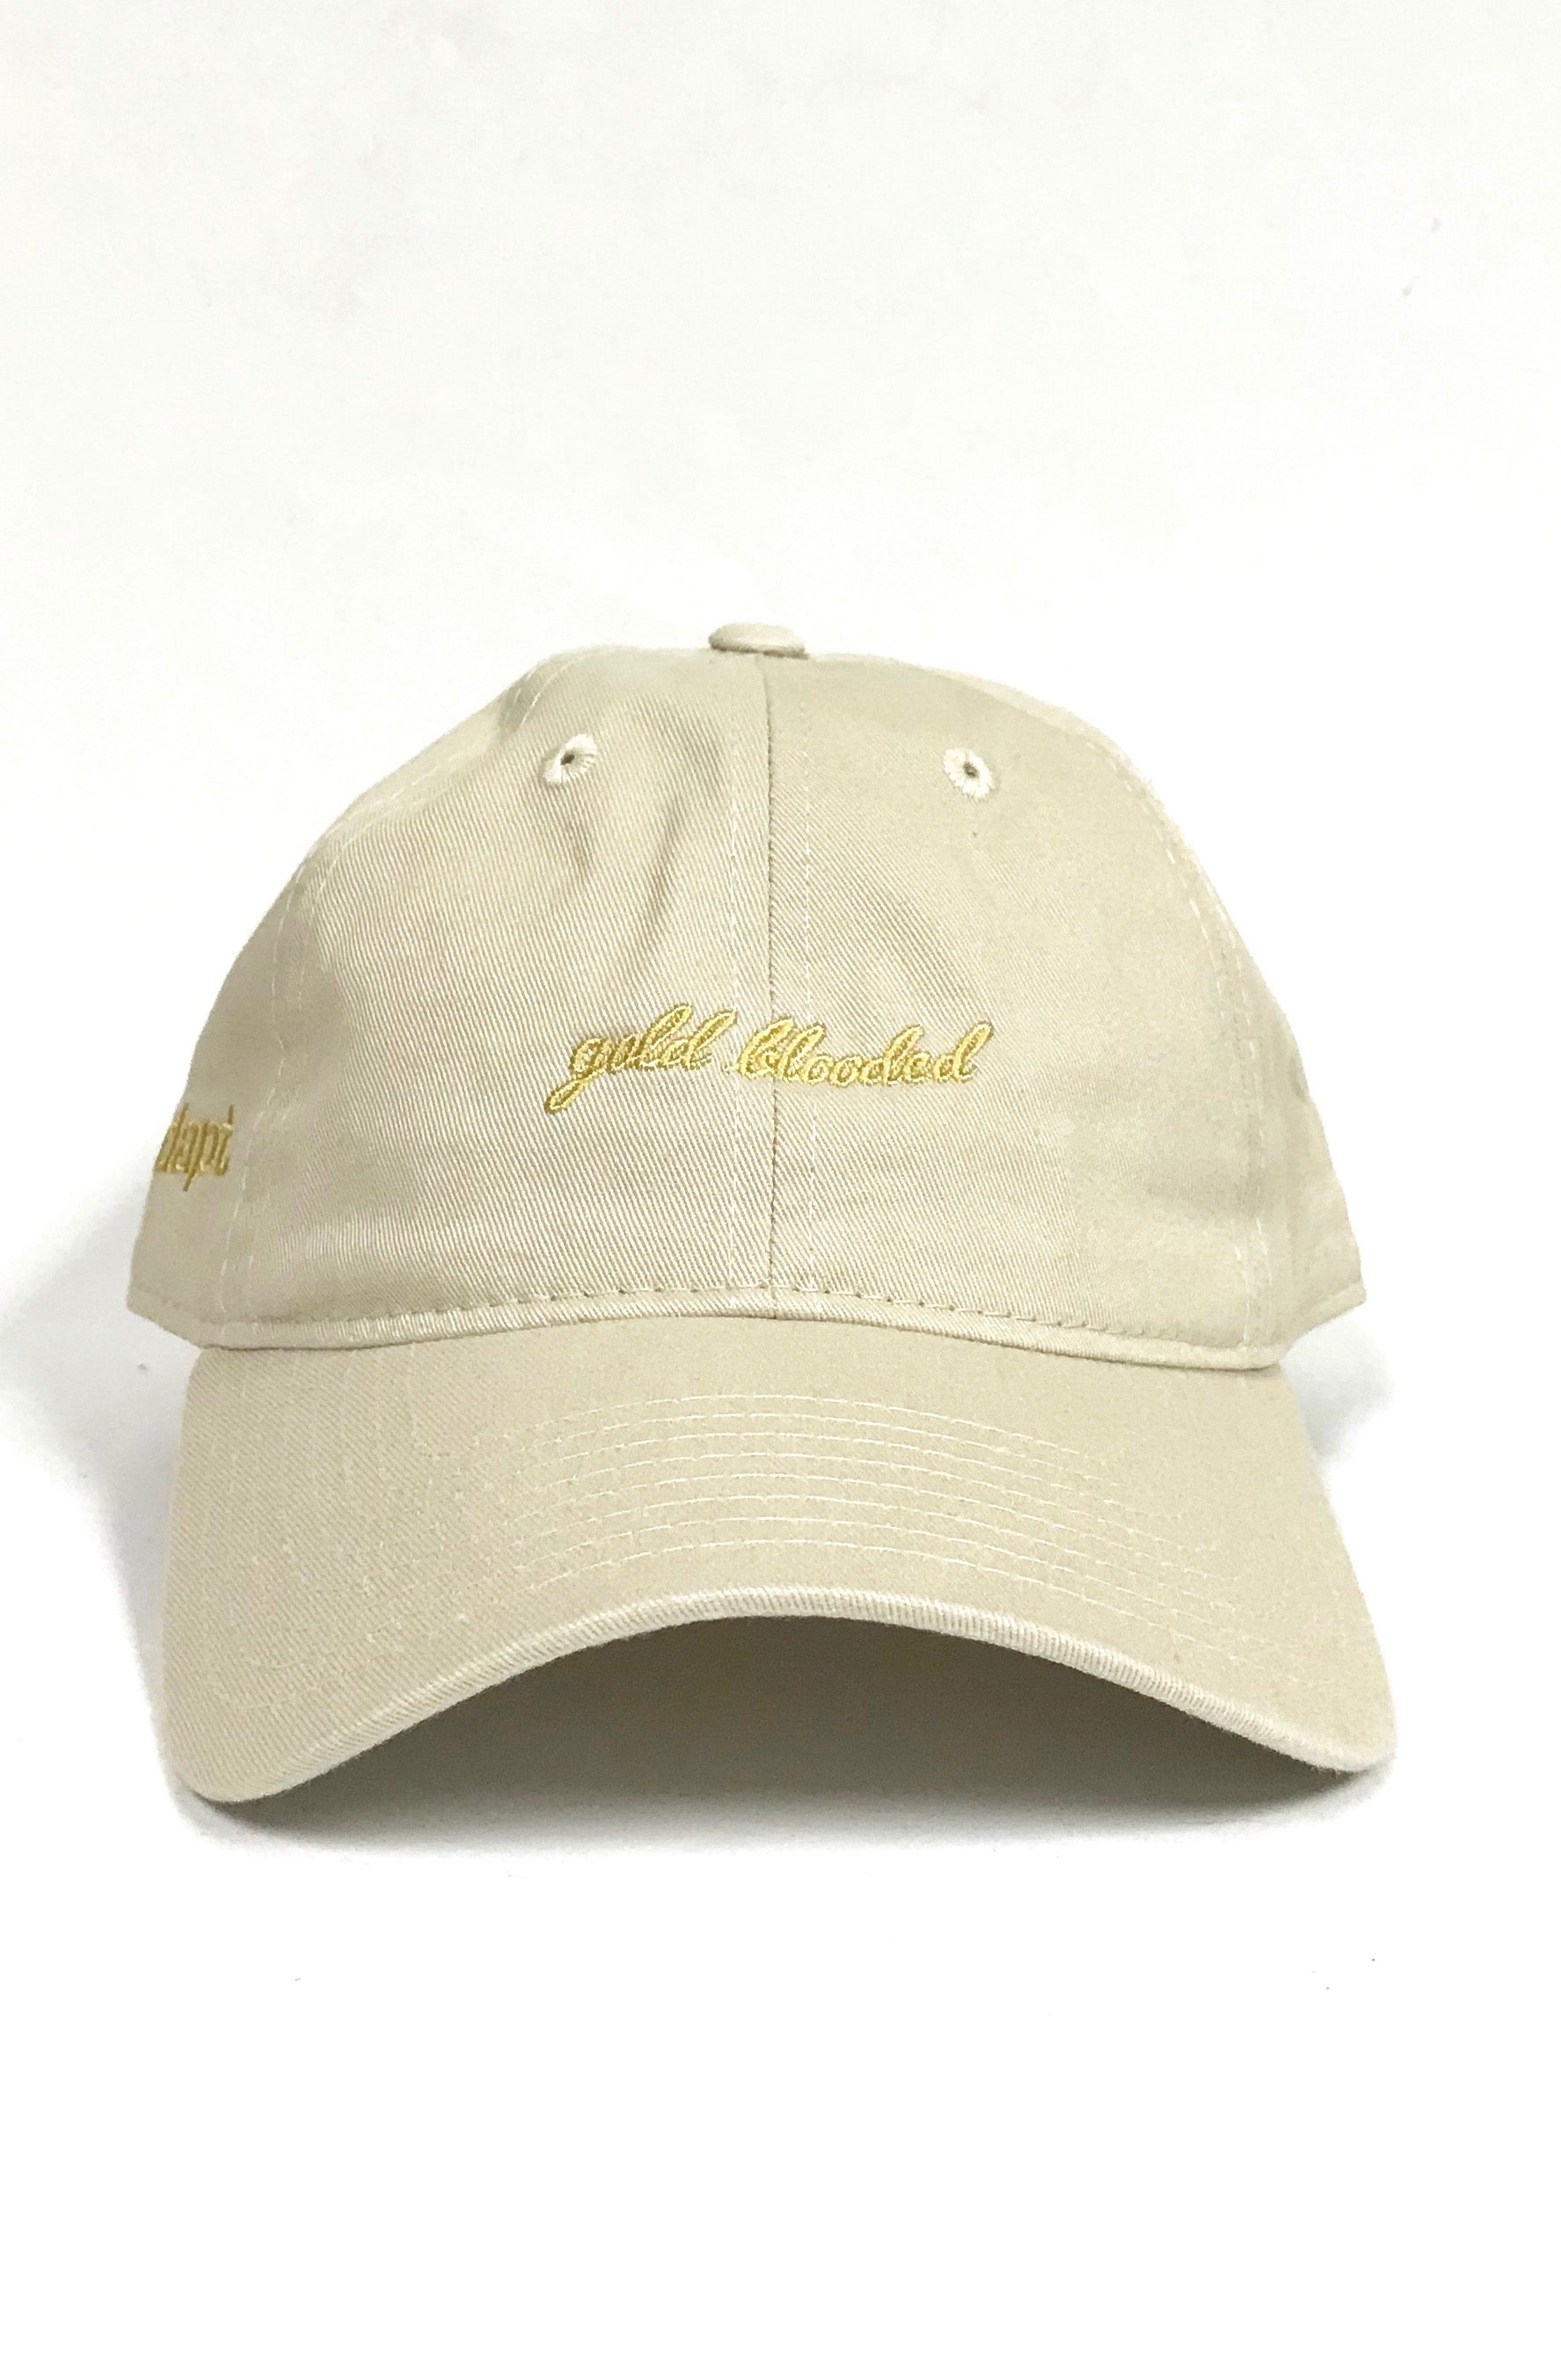 Gold Blooded (Stone Low Crown Cap)